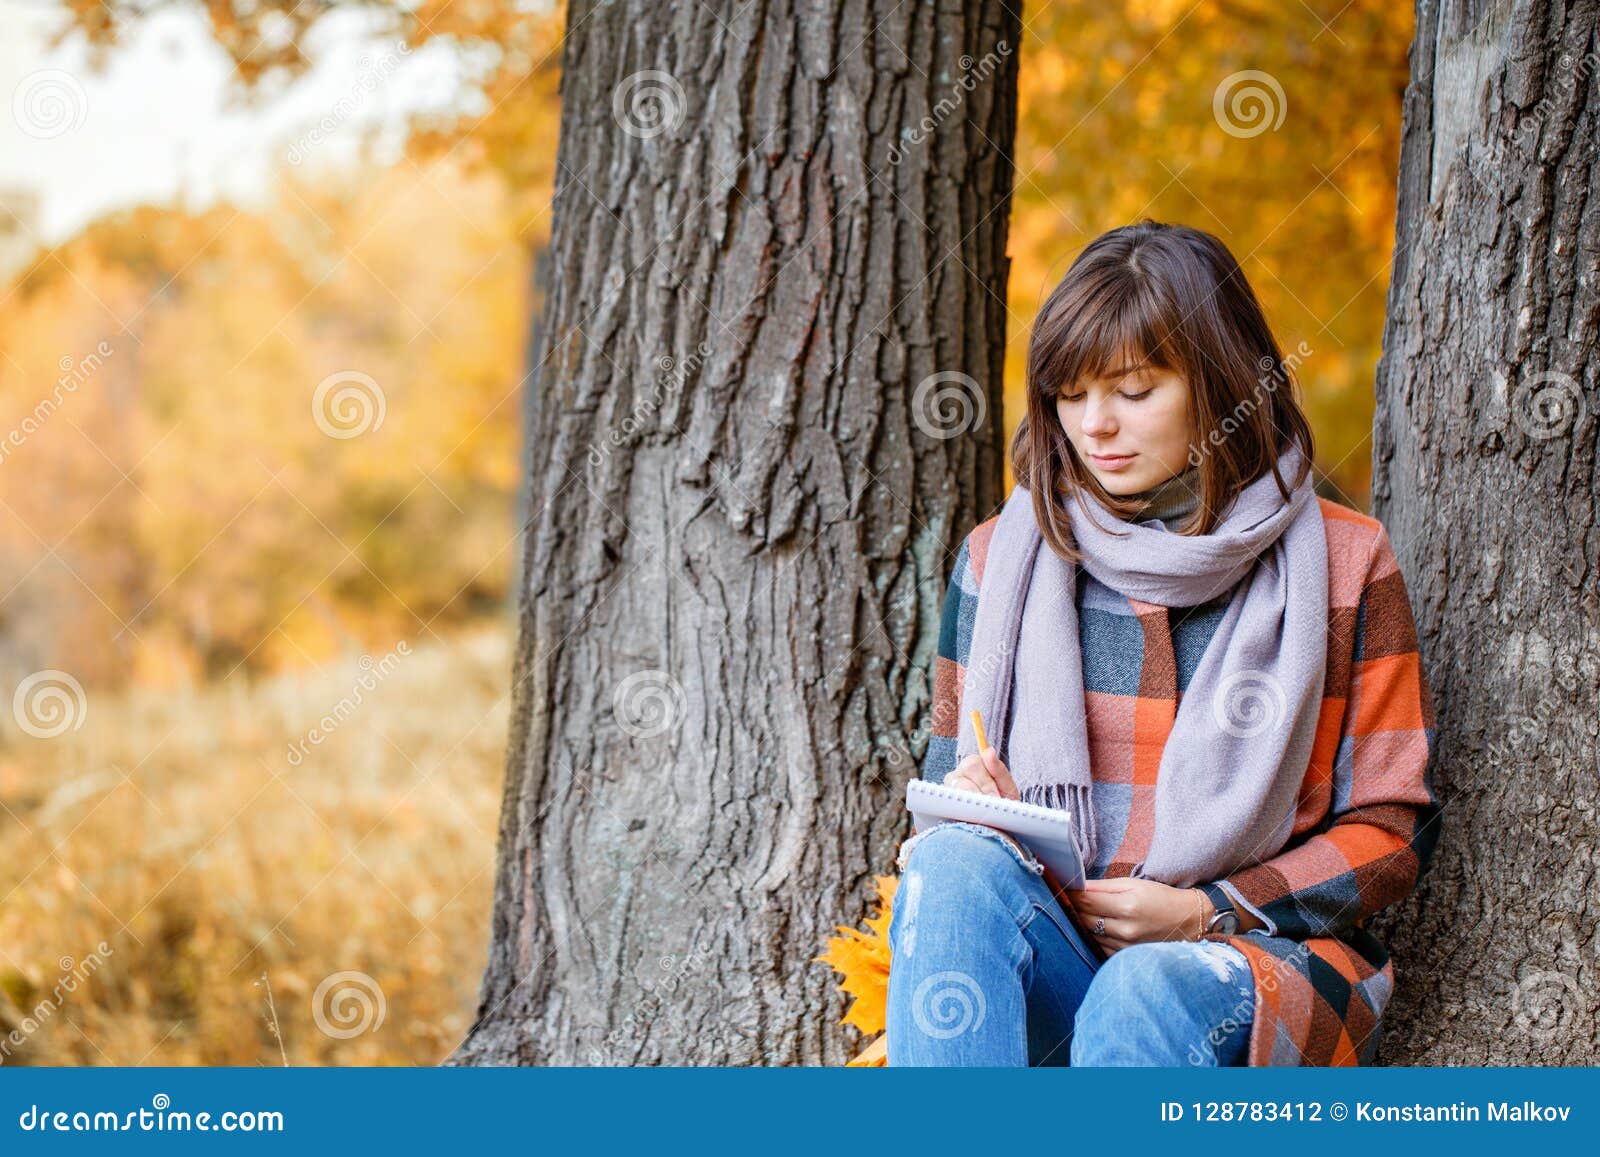 University Park, Study Concept. Portrait of Young Woman in Fall Forest ...